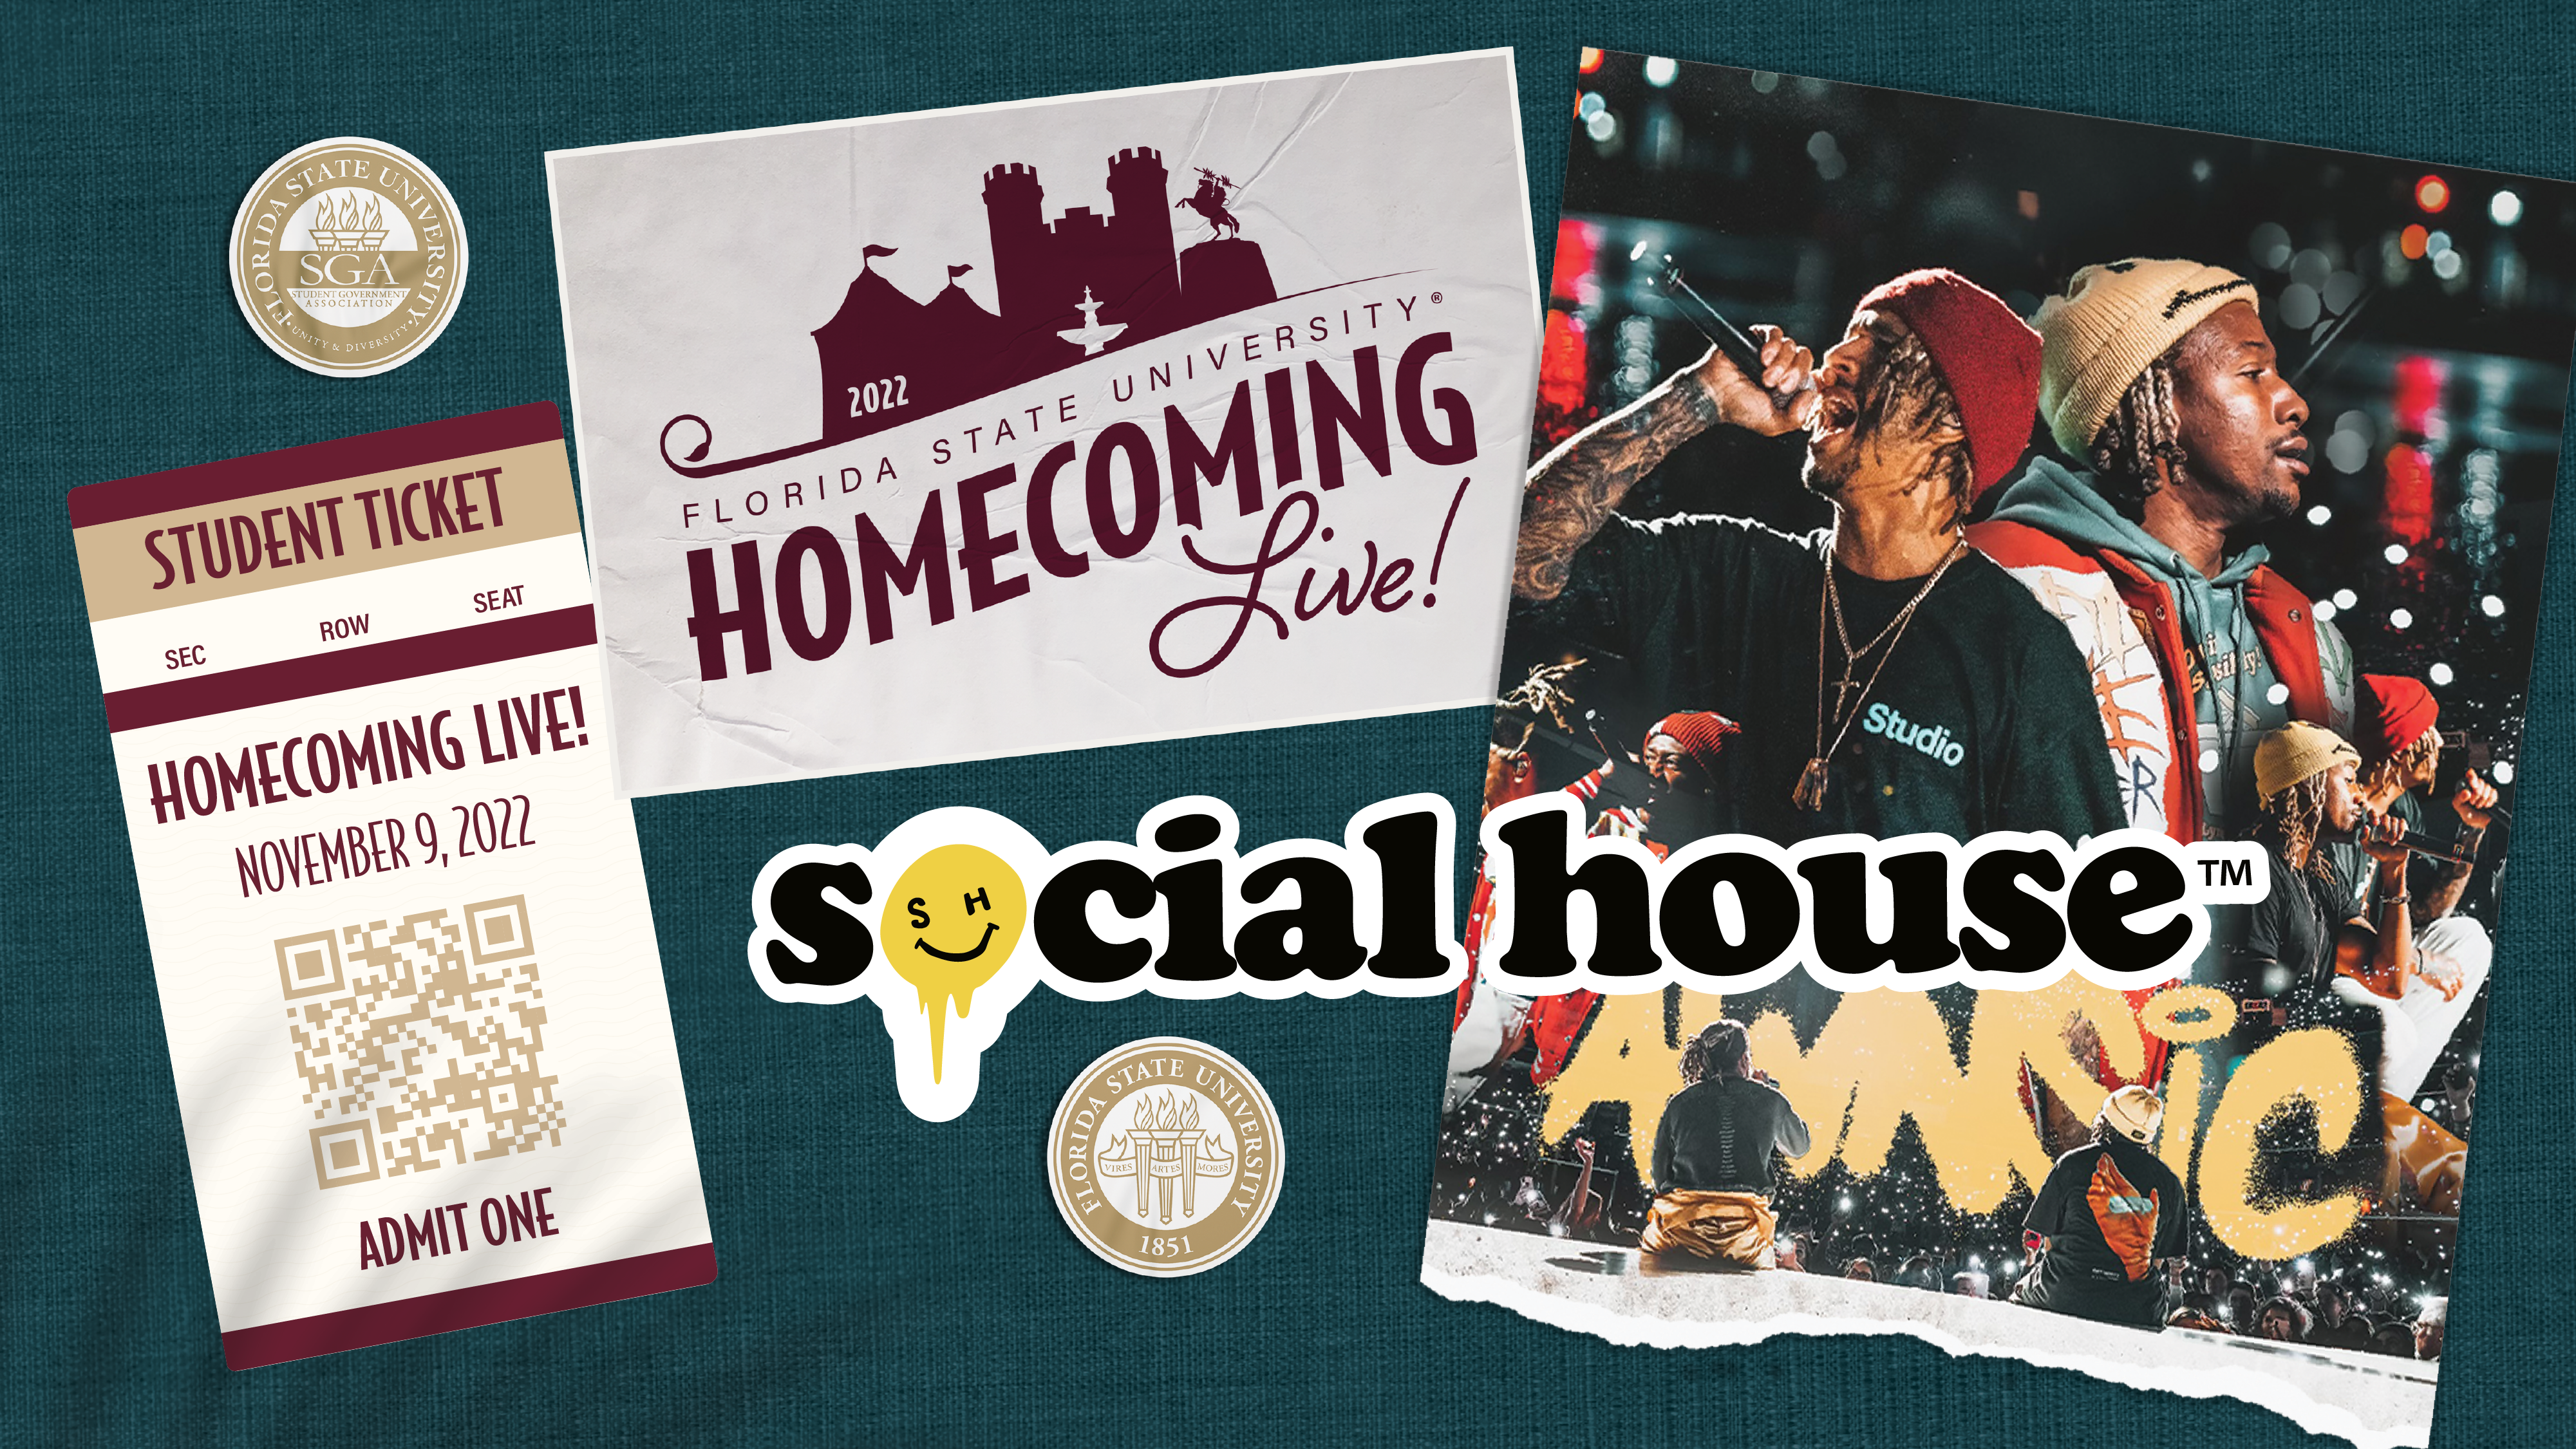 Social House homecoming live banner click for more information